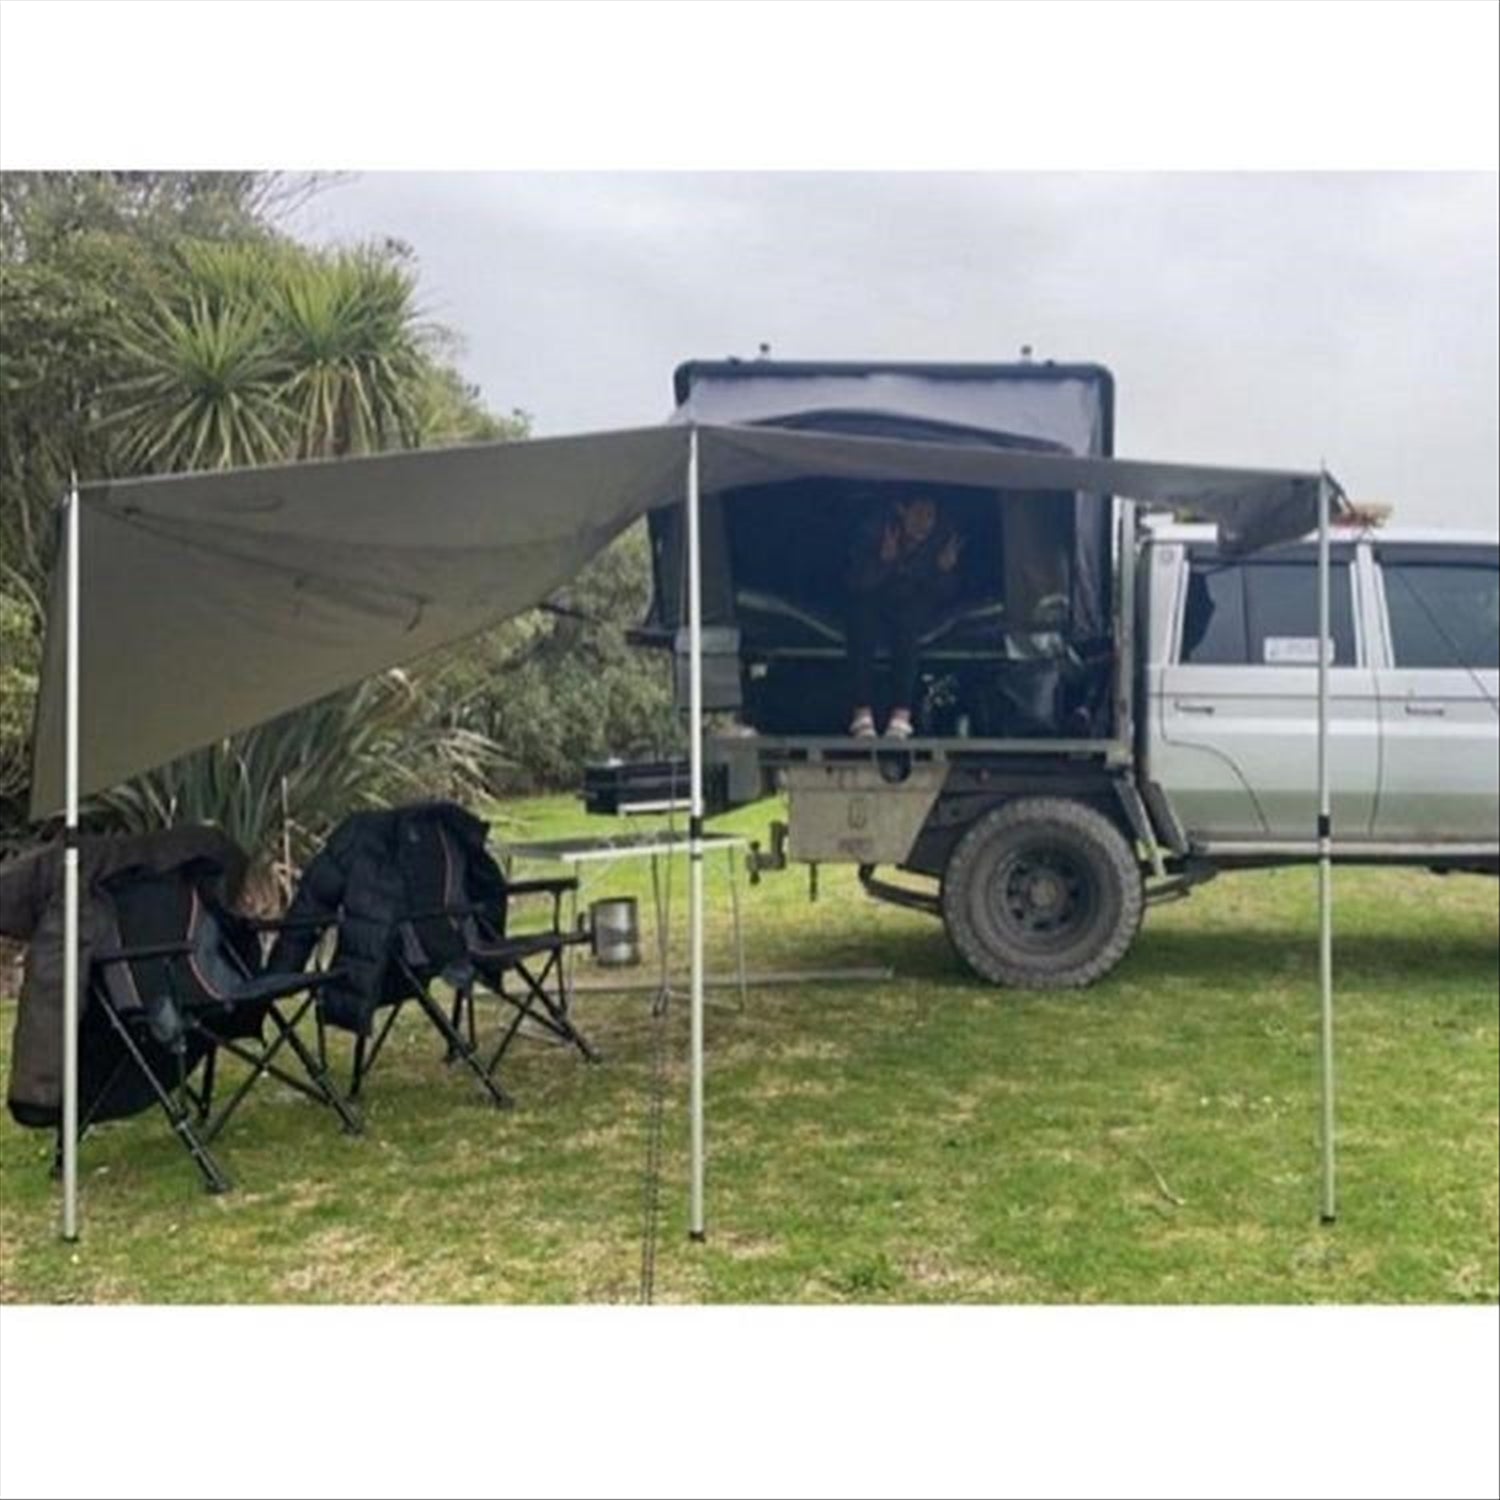 Wild Land Wild Land Multi-function Awning for DC2 Roof Top Tent